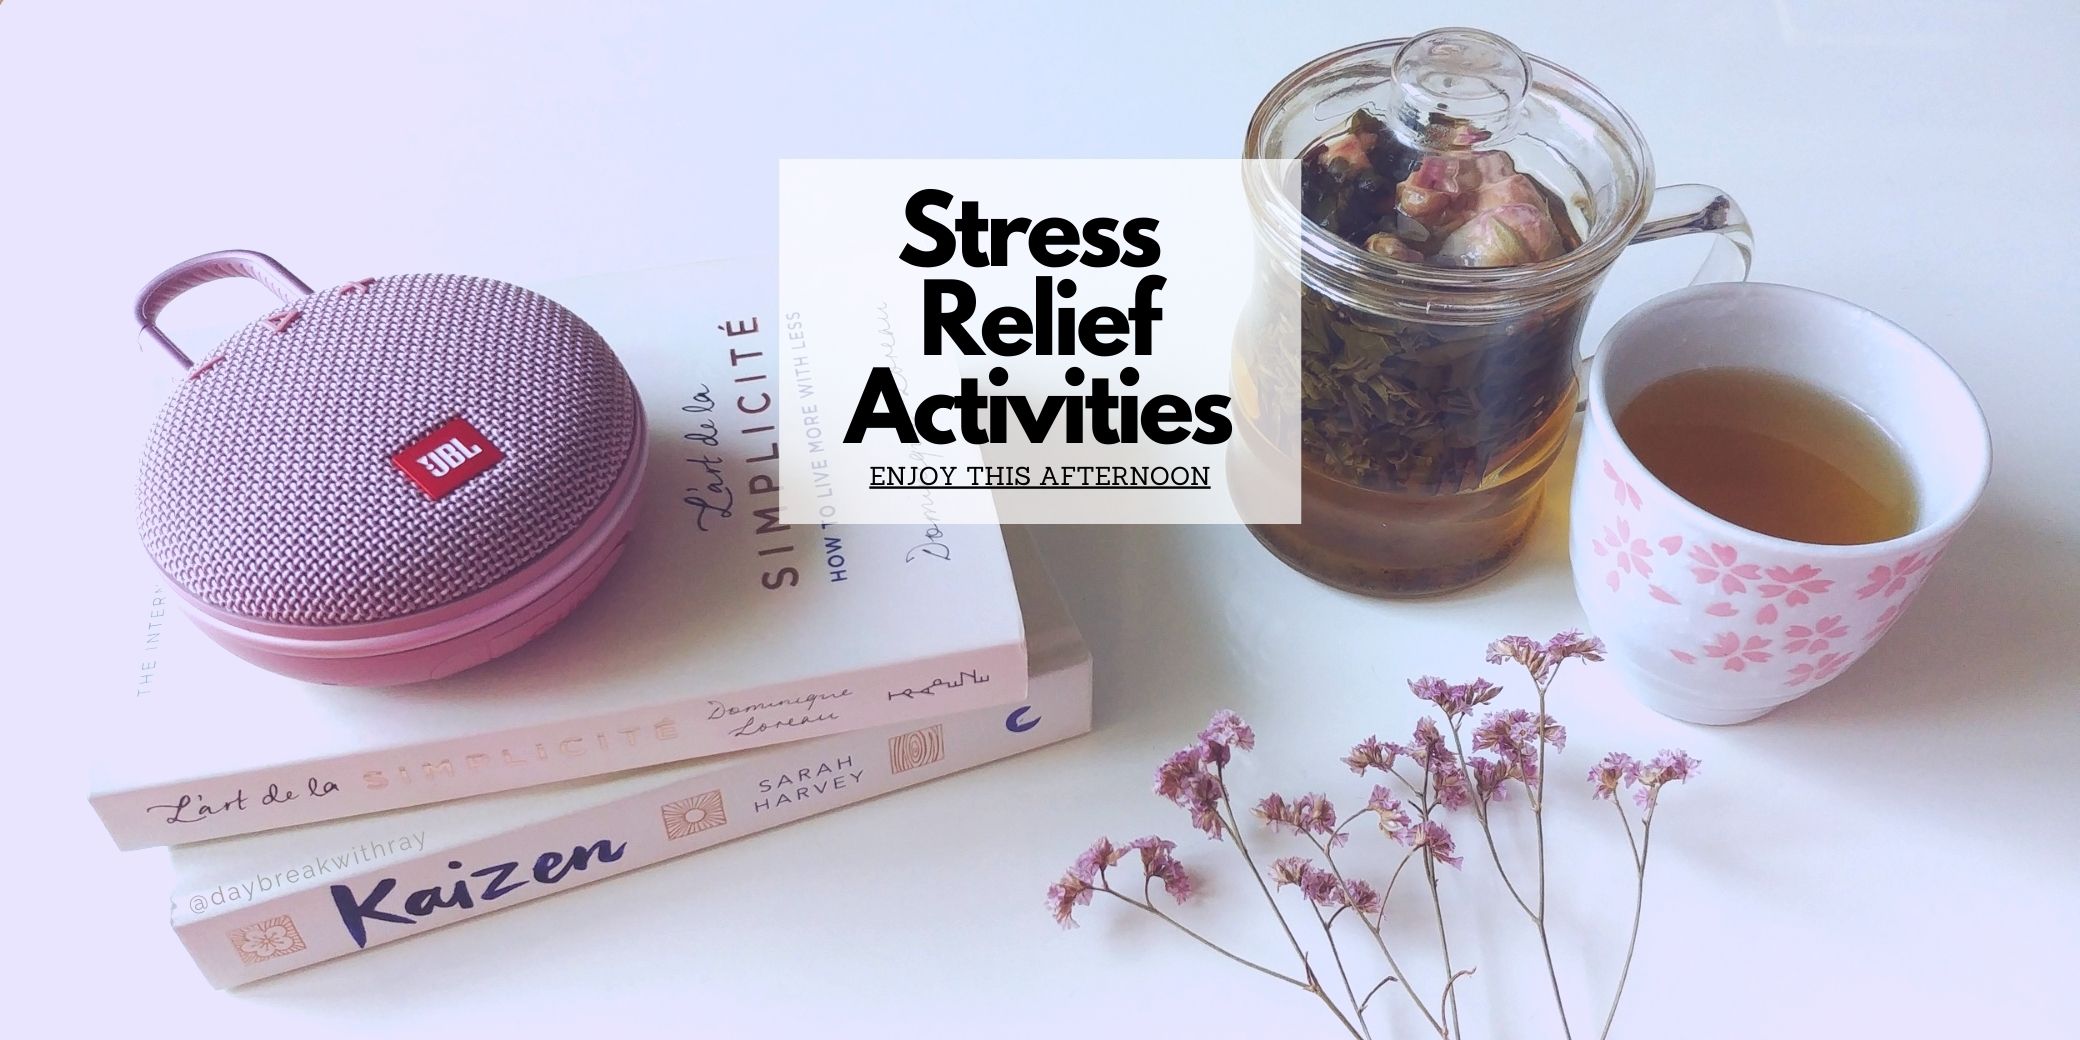 (Featured Image) 6 Promising Stress Relief Activities to Enjoy This Afternoon